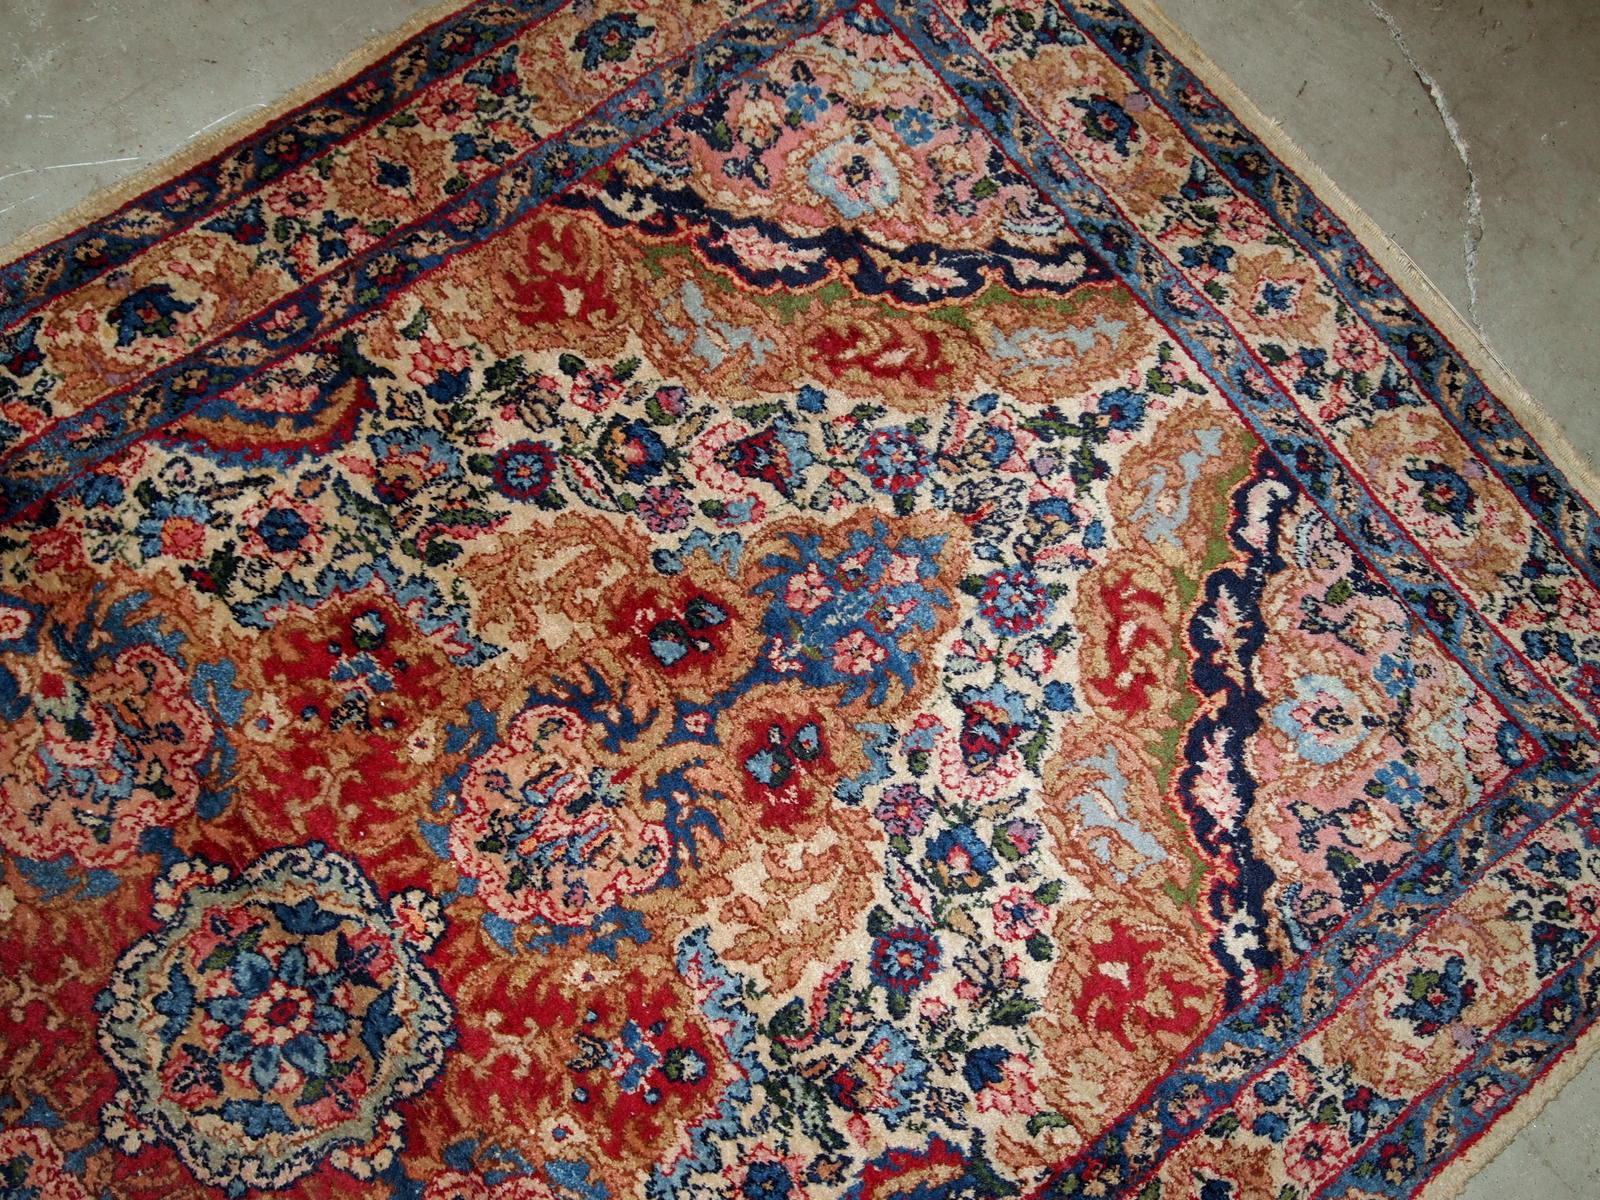 Handmade antique Kerman rug from Middle East in colourful shades. The rug is in original good condition.

?-condition: original good,

-circa 1910s,

-size: 4.1' x 5.4' (125cm x 164cm),

-material: wool,

-country of origin: Middle